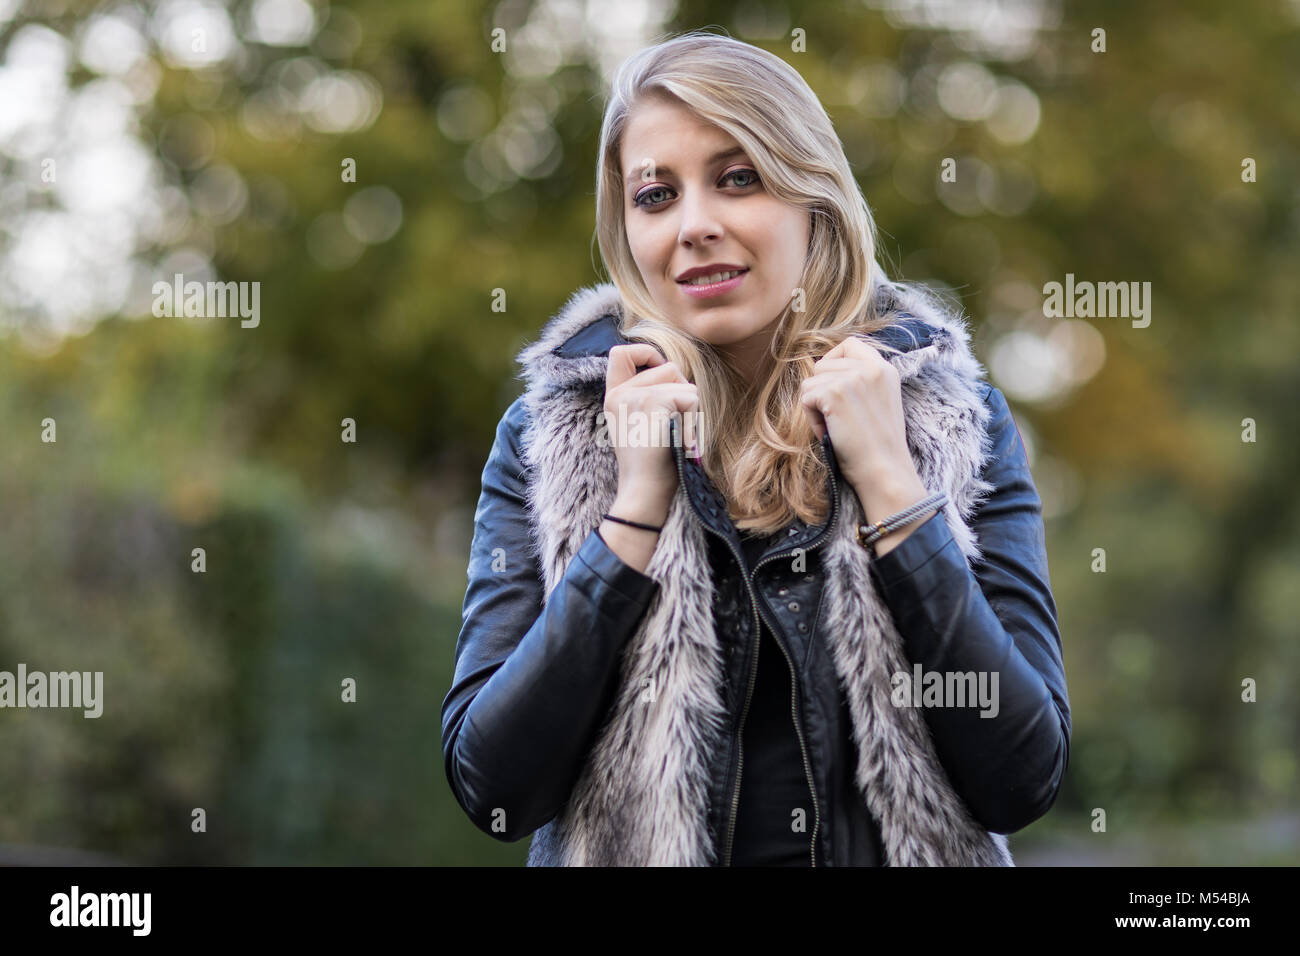 Portrait of a young blond woman Stock Photo